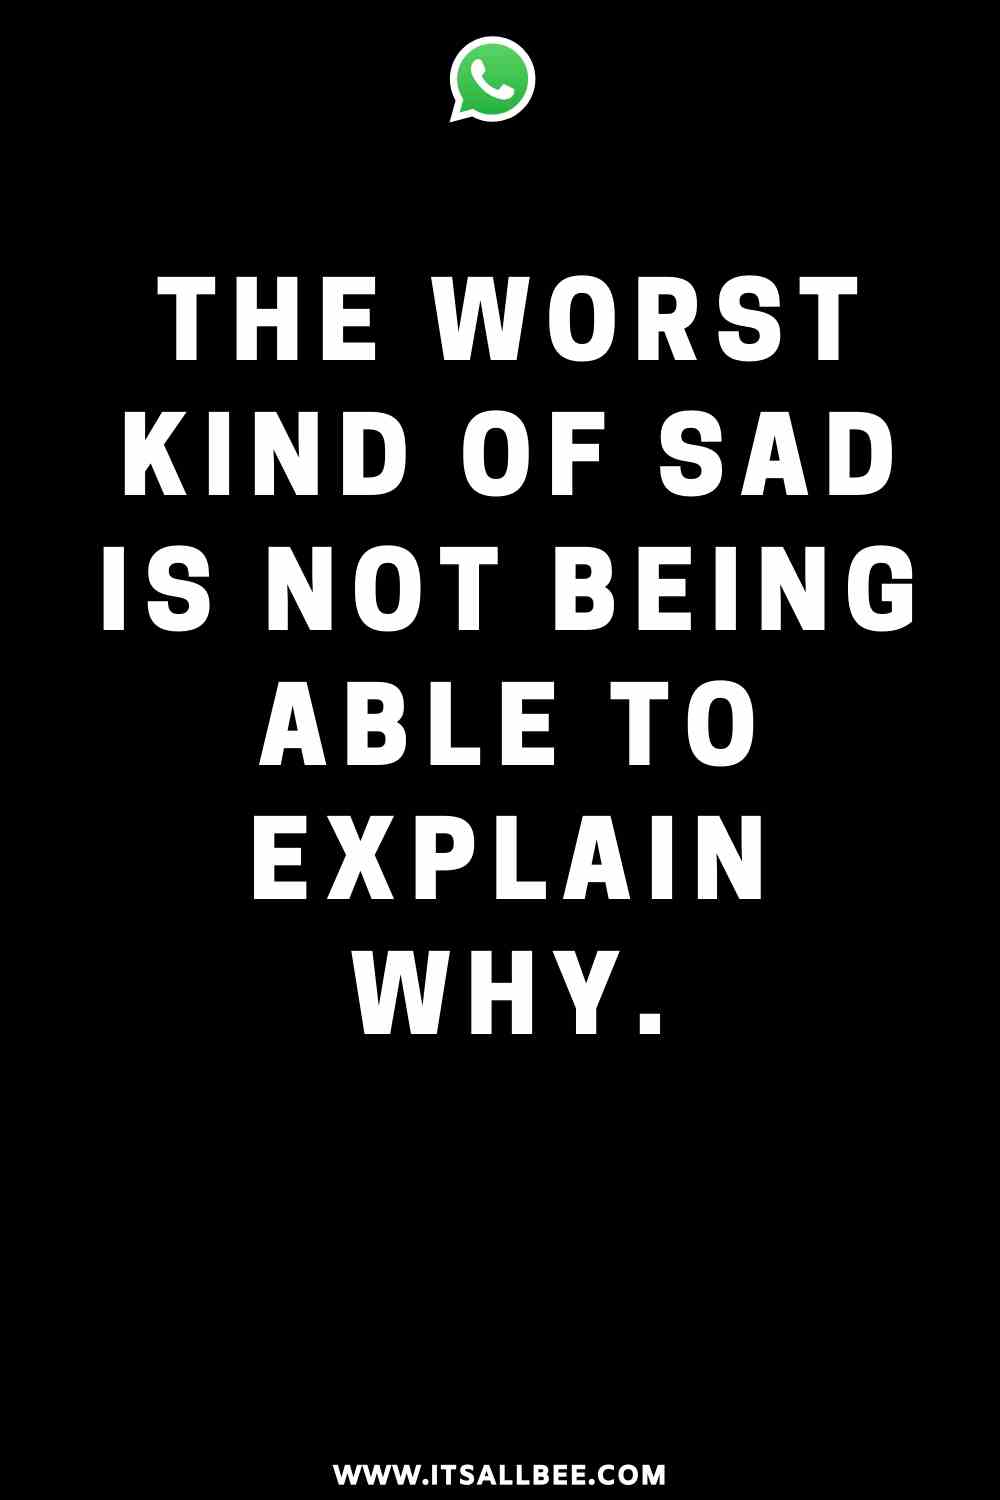 Whatsapp status - the worst kind of sad is not being able to explain why | status about whatsapp